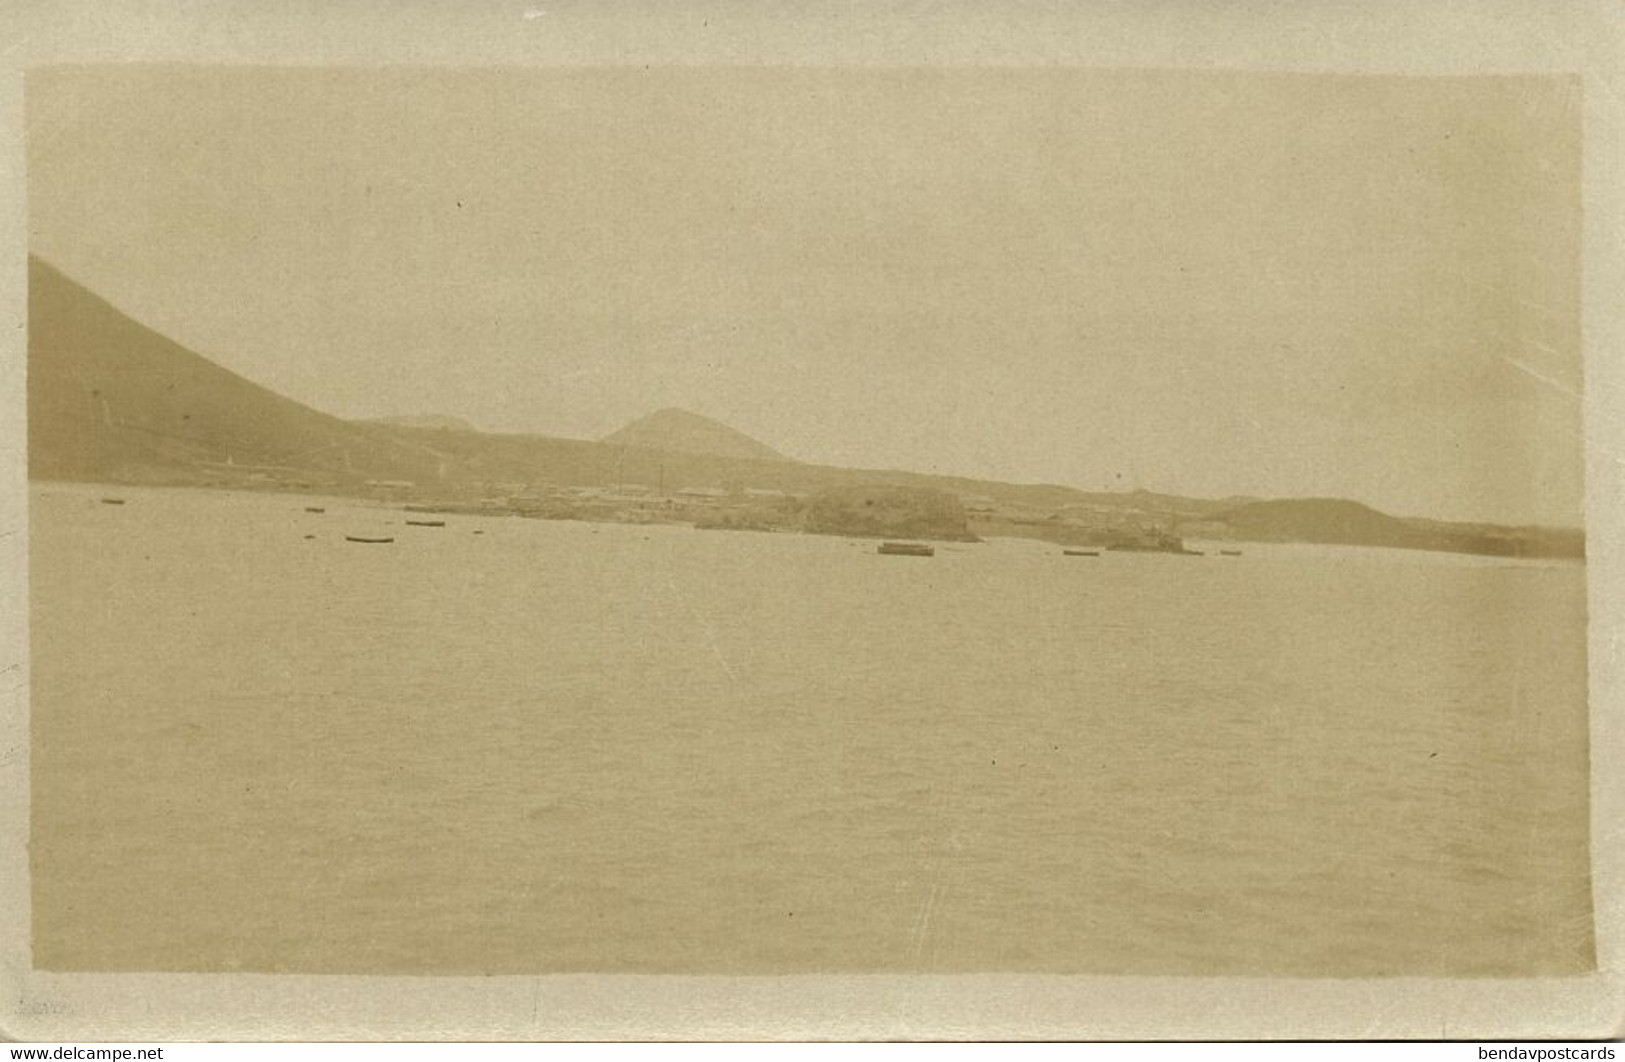 Ascension Island, Panorama From The Sea (1920s) RPPC Postcard - Ascension